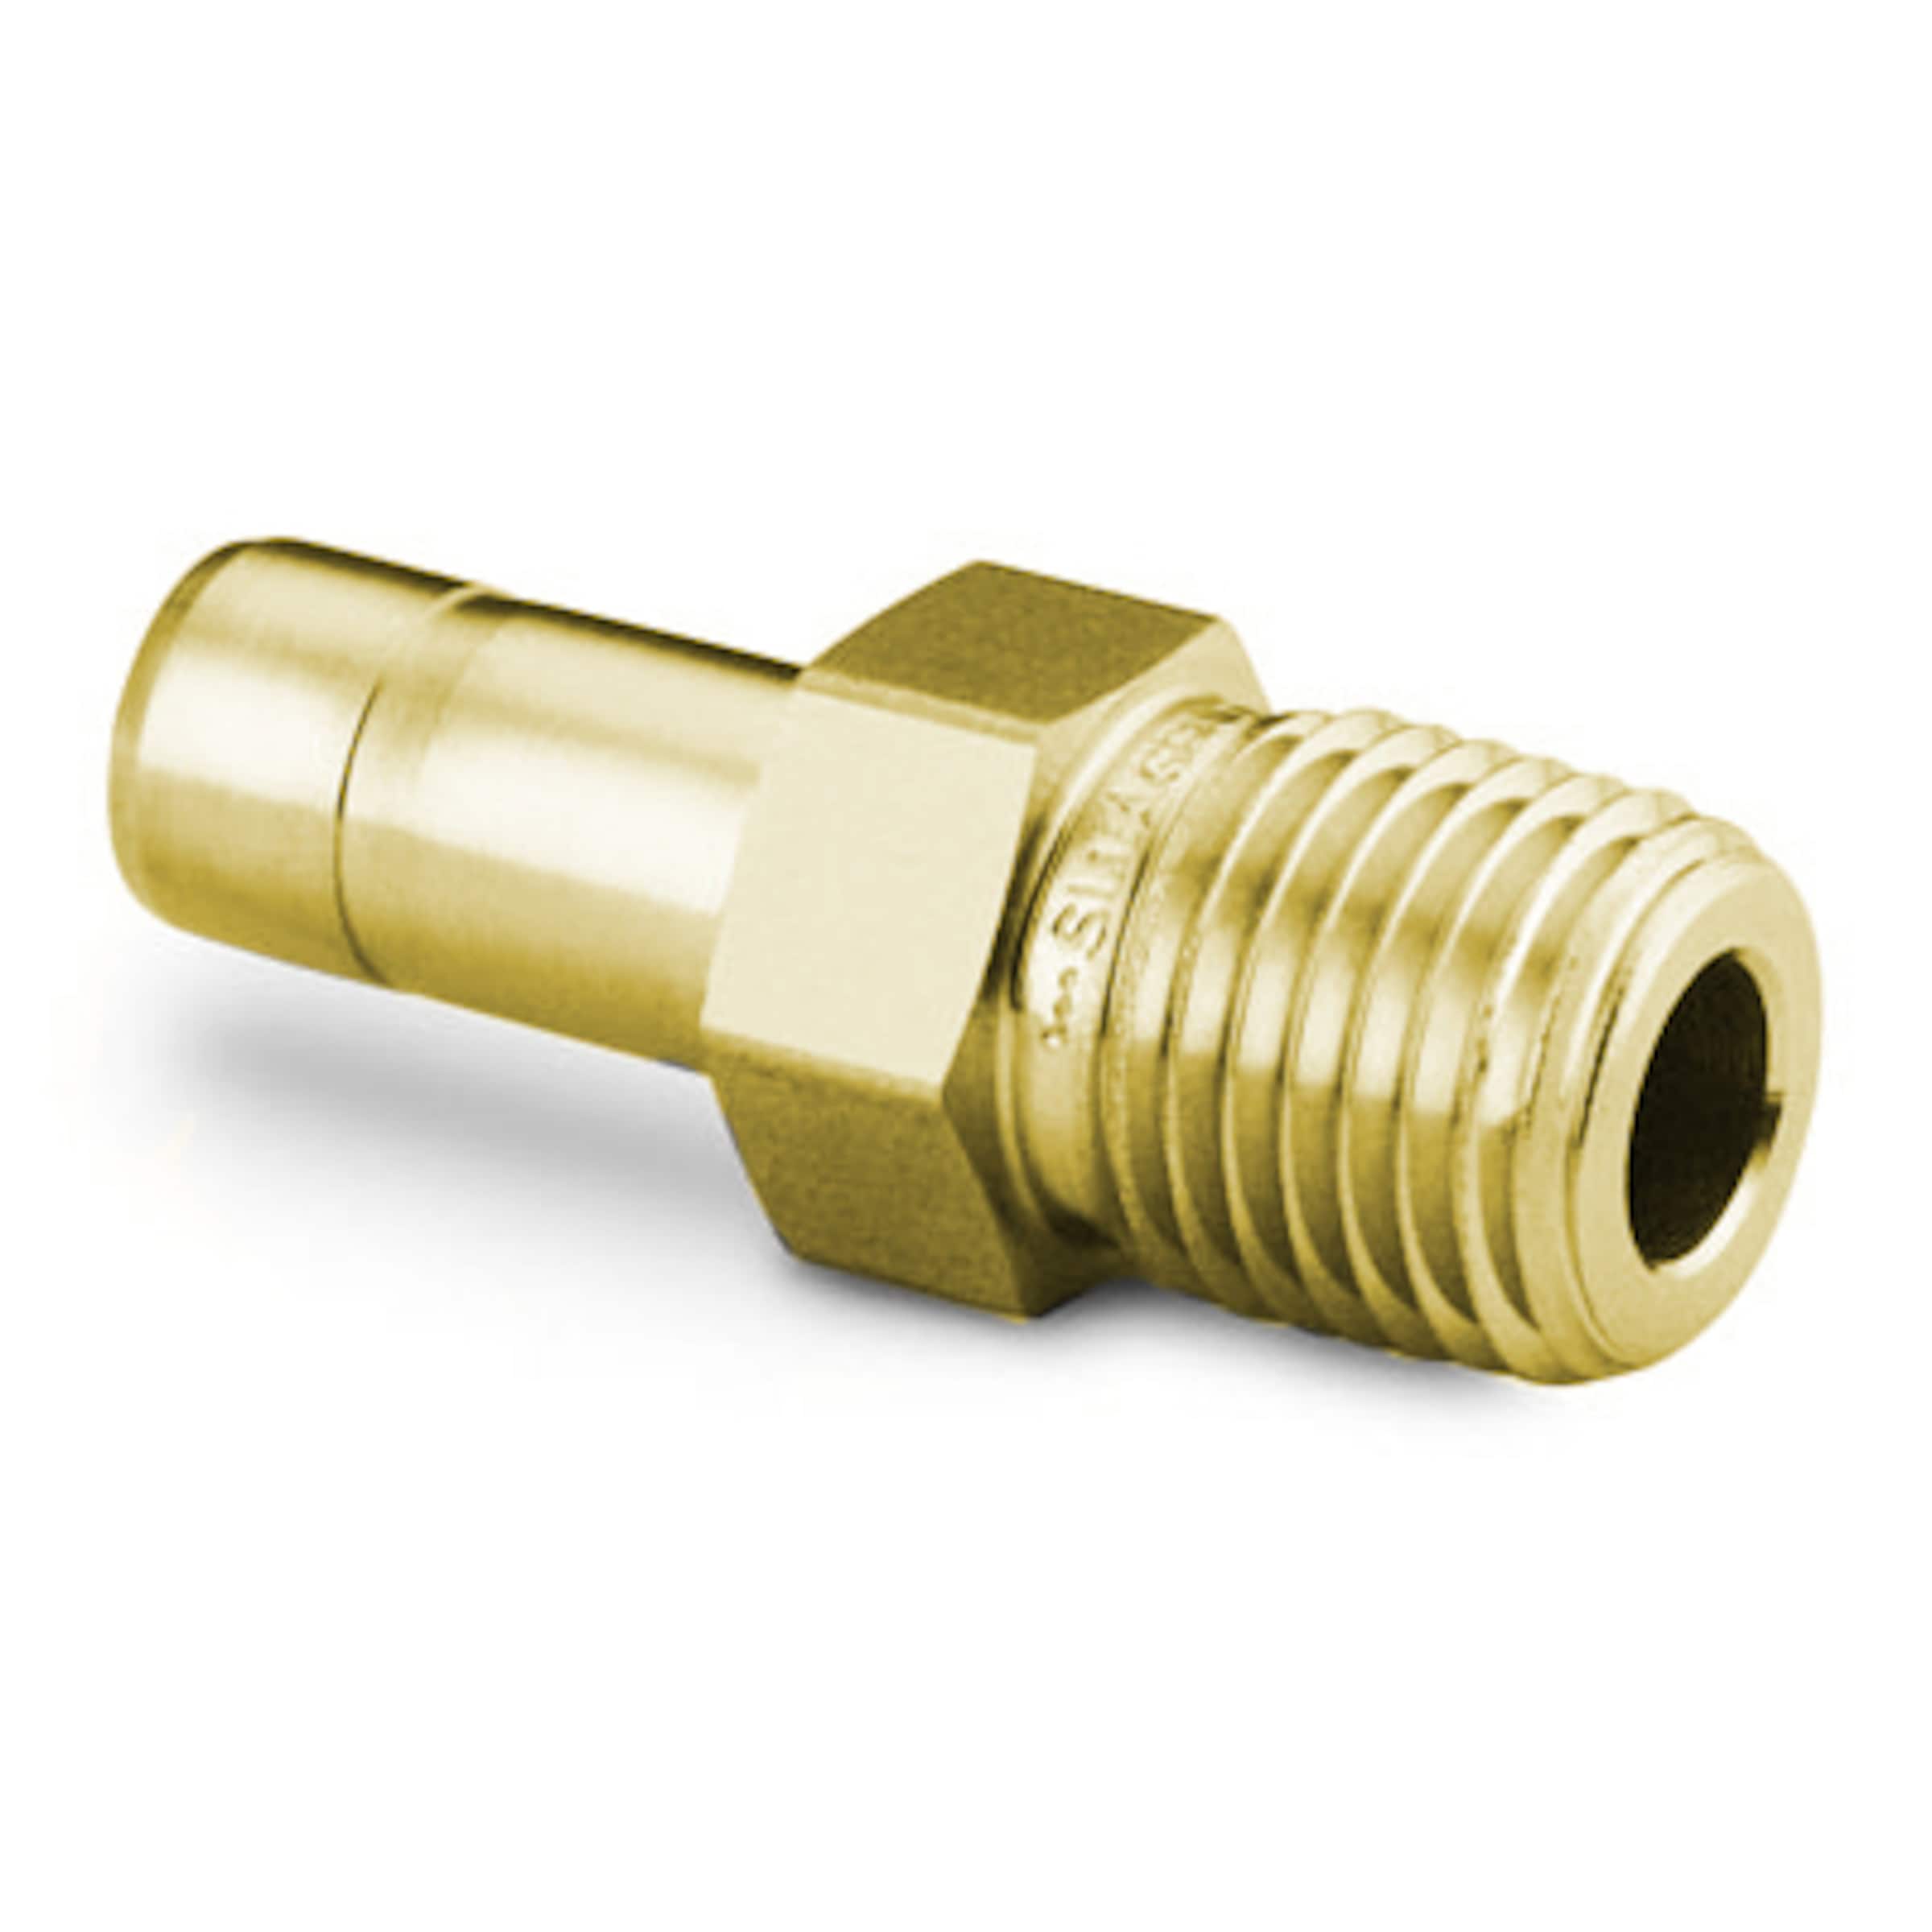 Brass Swagelok Tube Fitting, Male Tube Adapter, 3/4 in. Tube OD x 3/4 in. Male  NPT, Tube Adapters, Tube Fittings and Adapters, Fittings, All Products